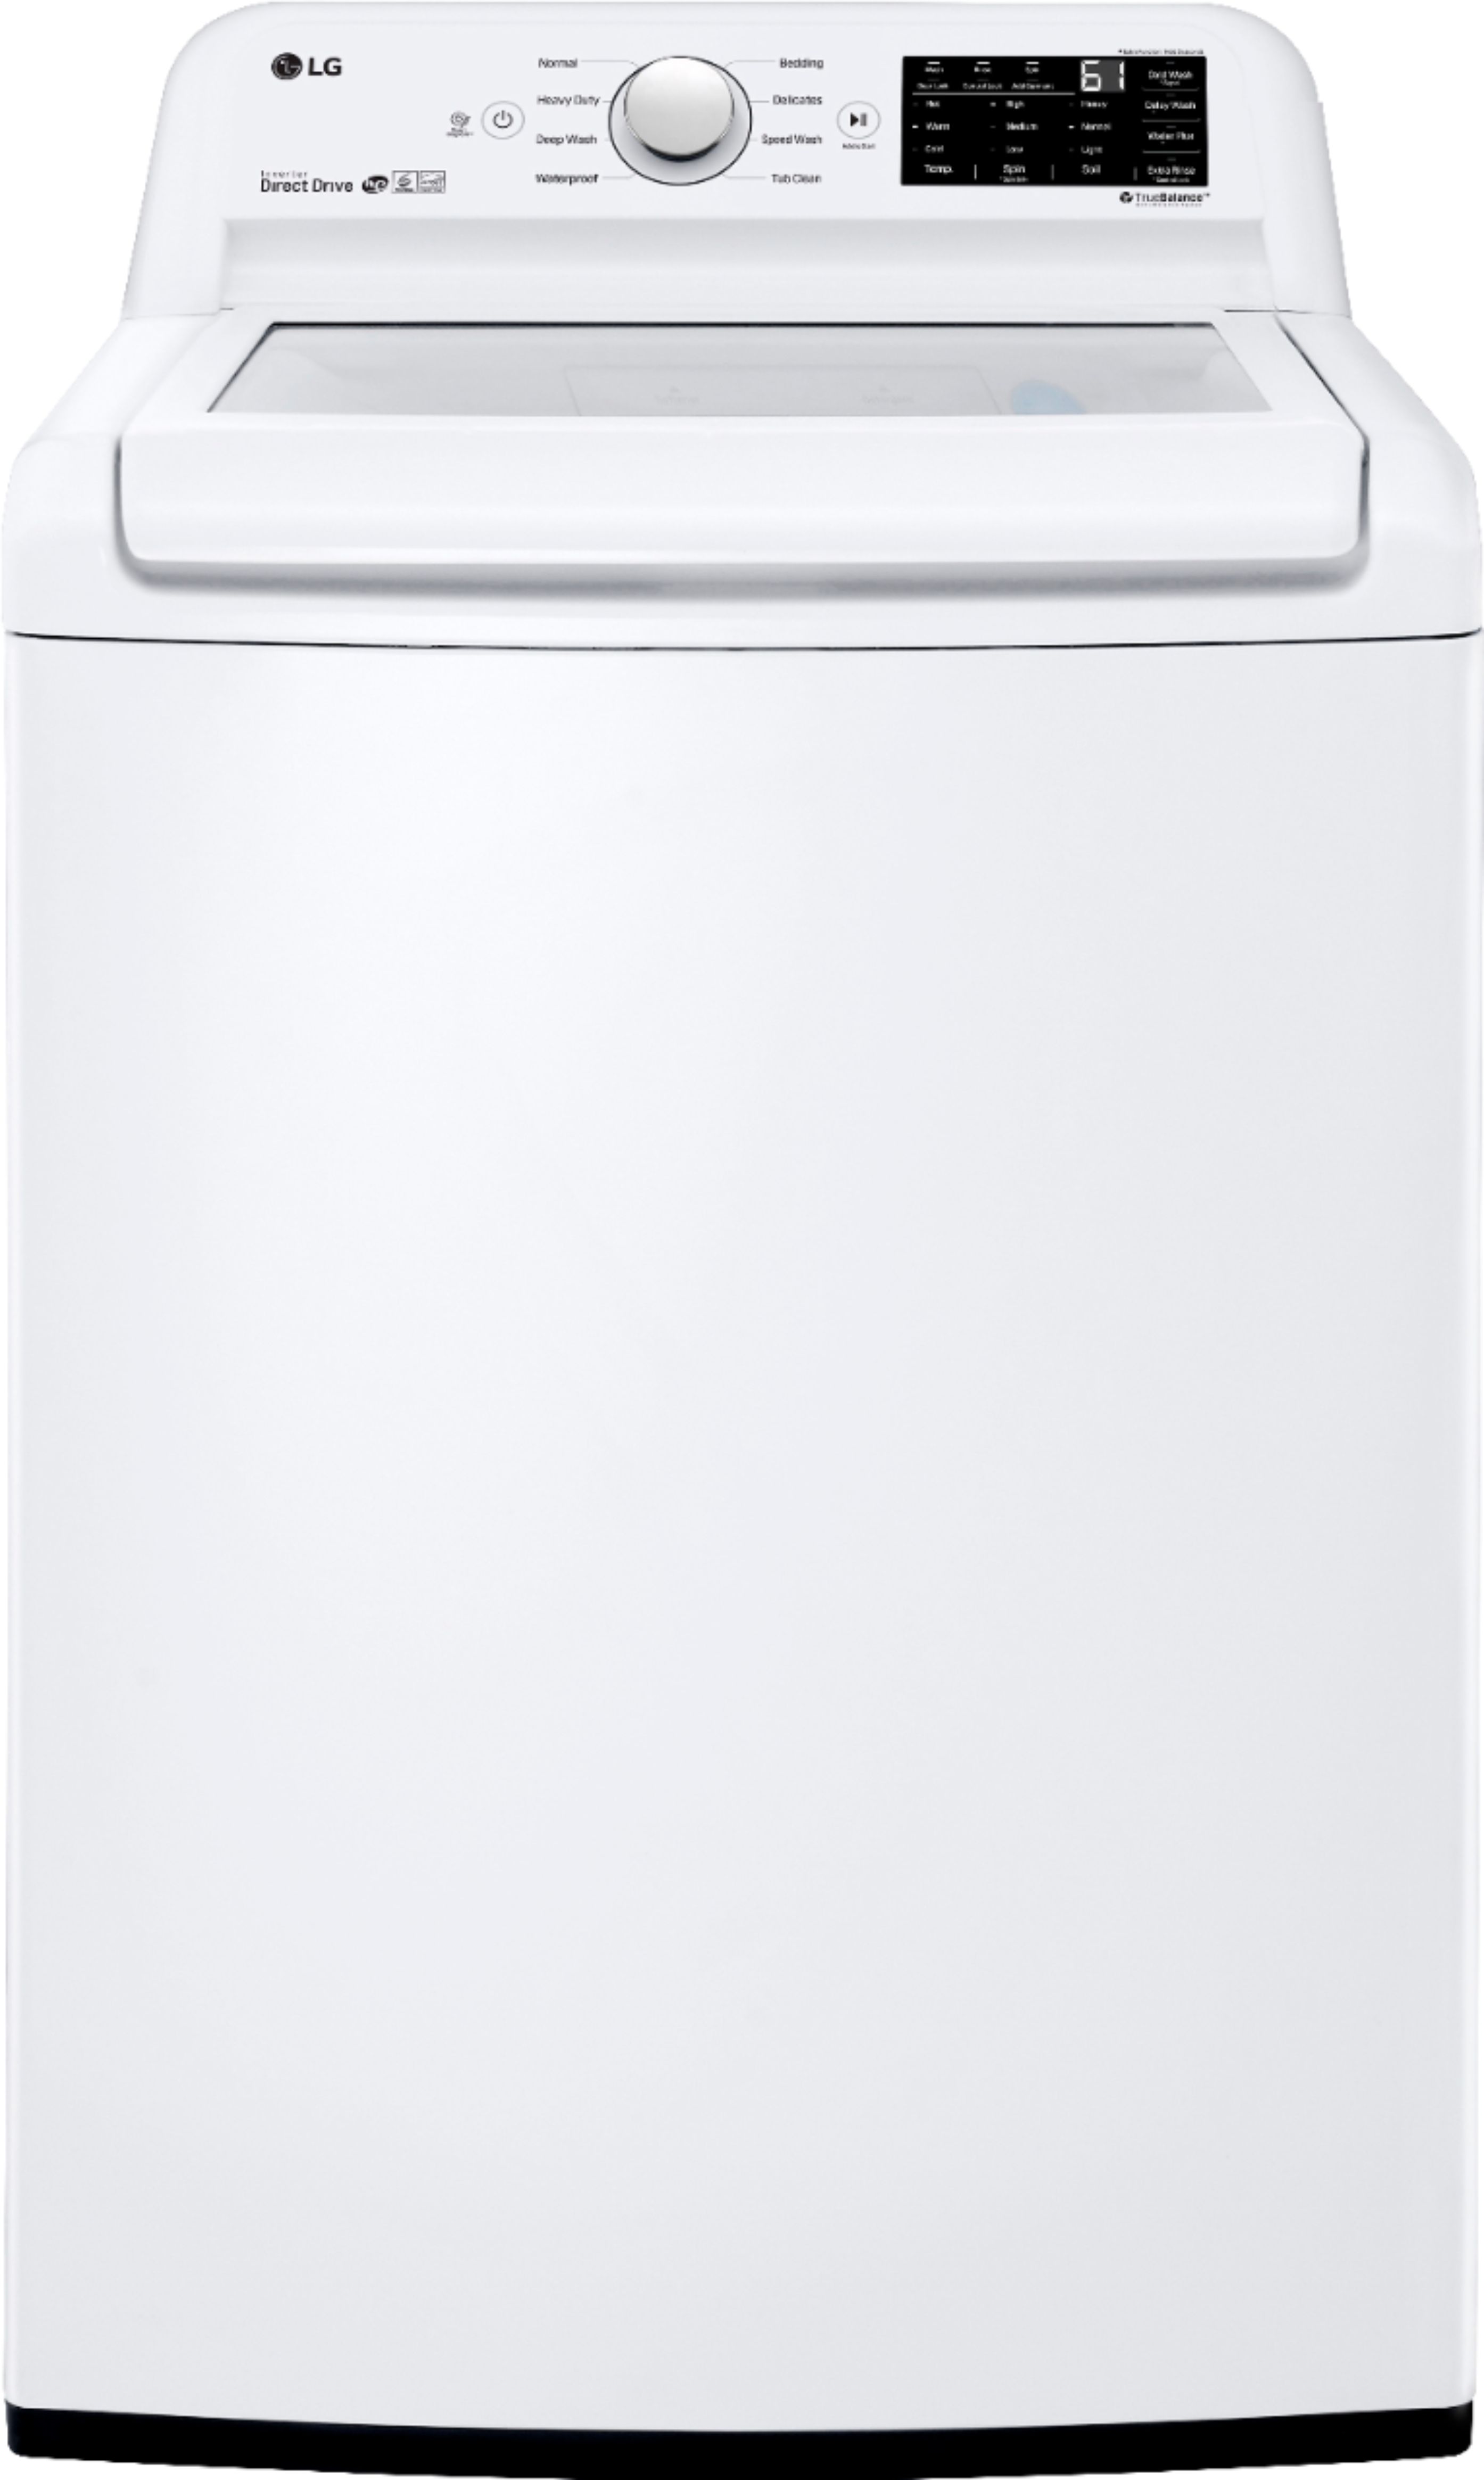 Lg 4 5 Cu Ft 8 Cycle Top Loading Washer With 6motion Technology White Wt7100cw Best Buy